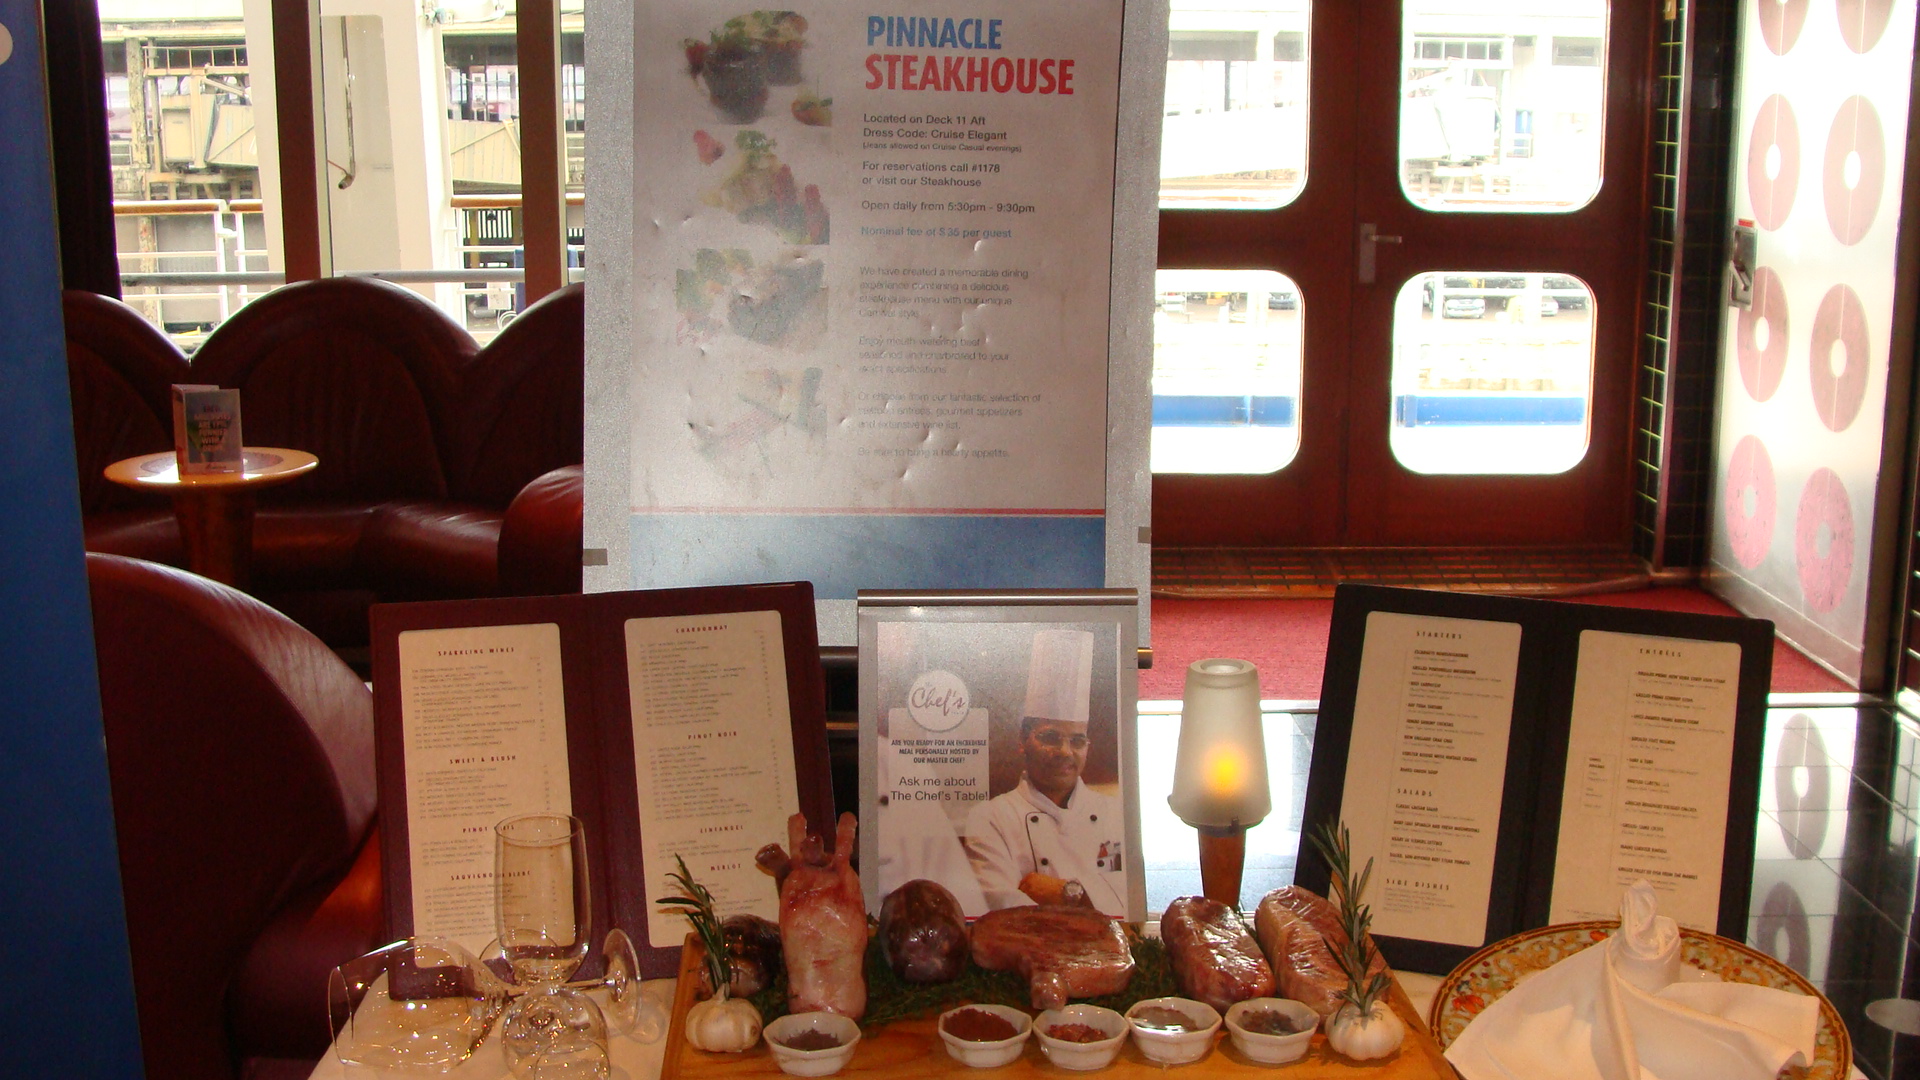 Pinnacle Steakhouse reservations table